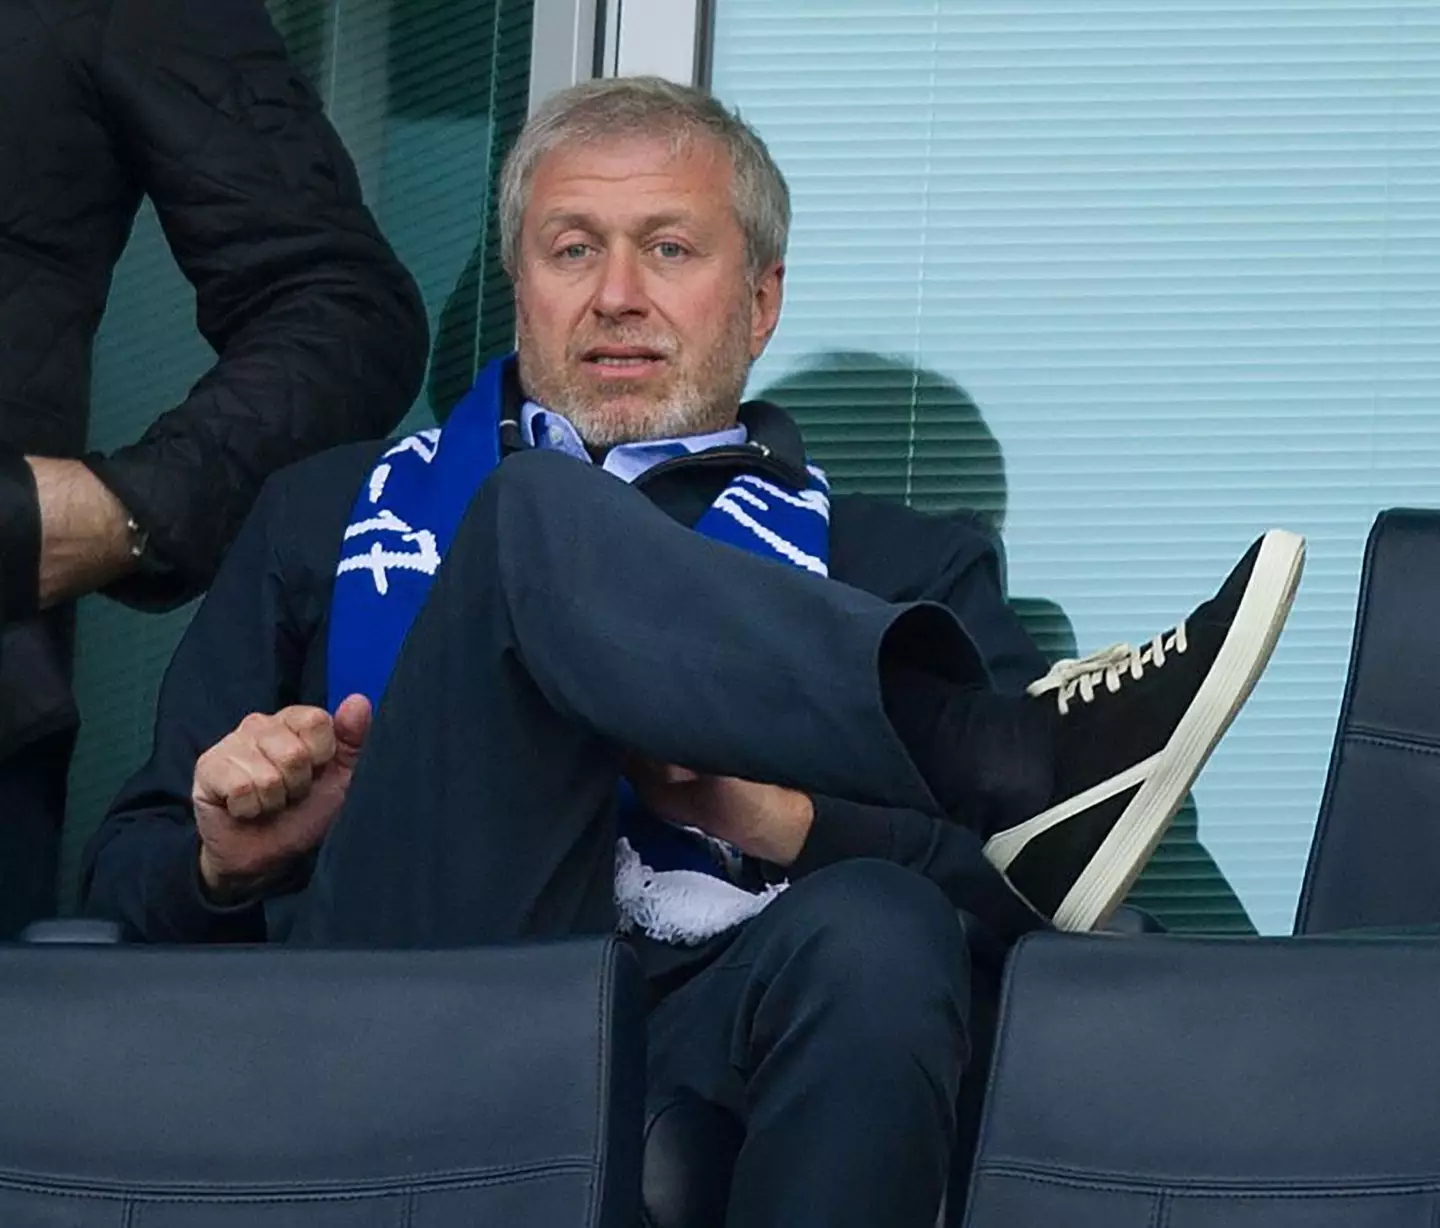 Abramovich has been seen at Stamford Bridge less over the past few years. Image: PA Images